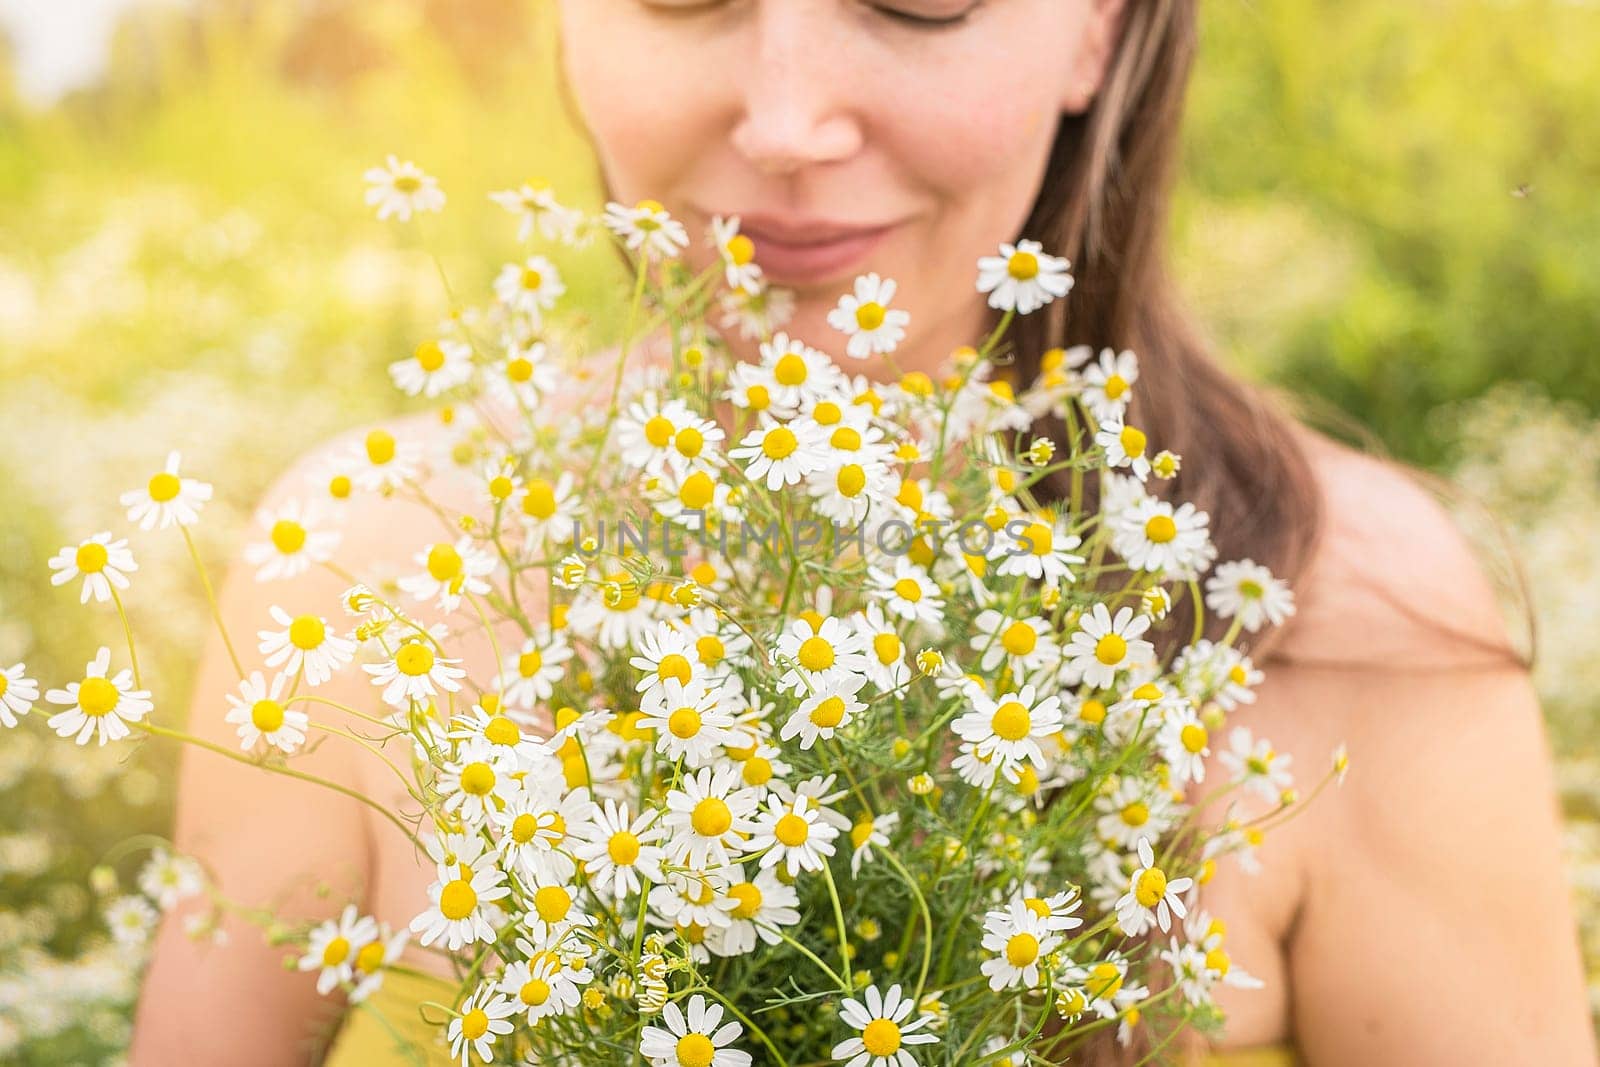 Woman holds daisies in her hands in the field in summer day